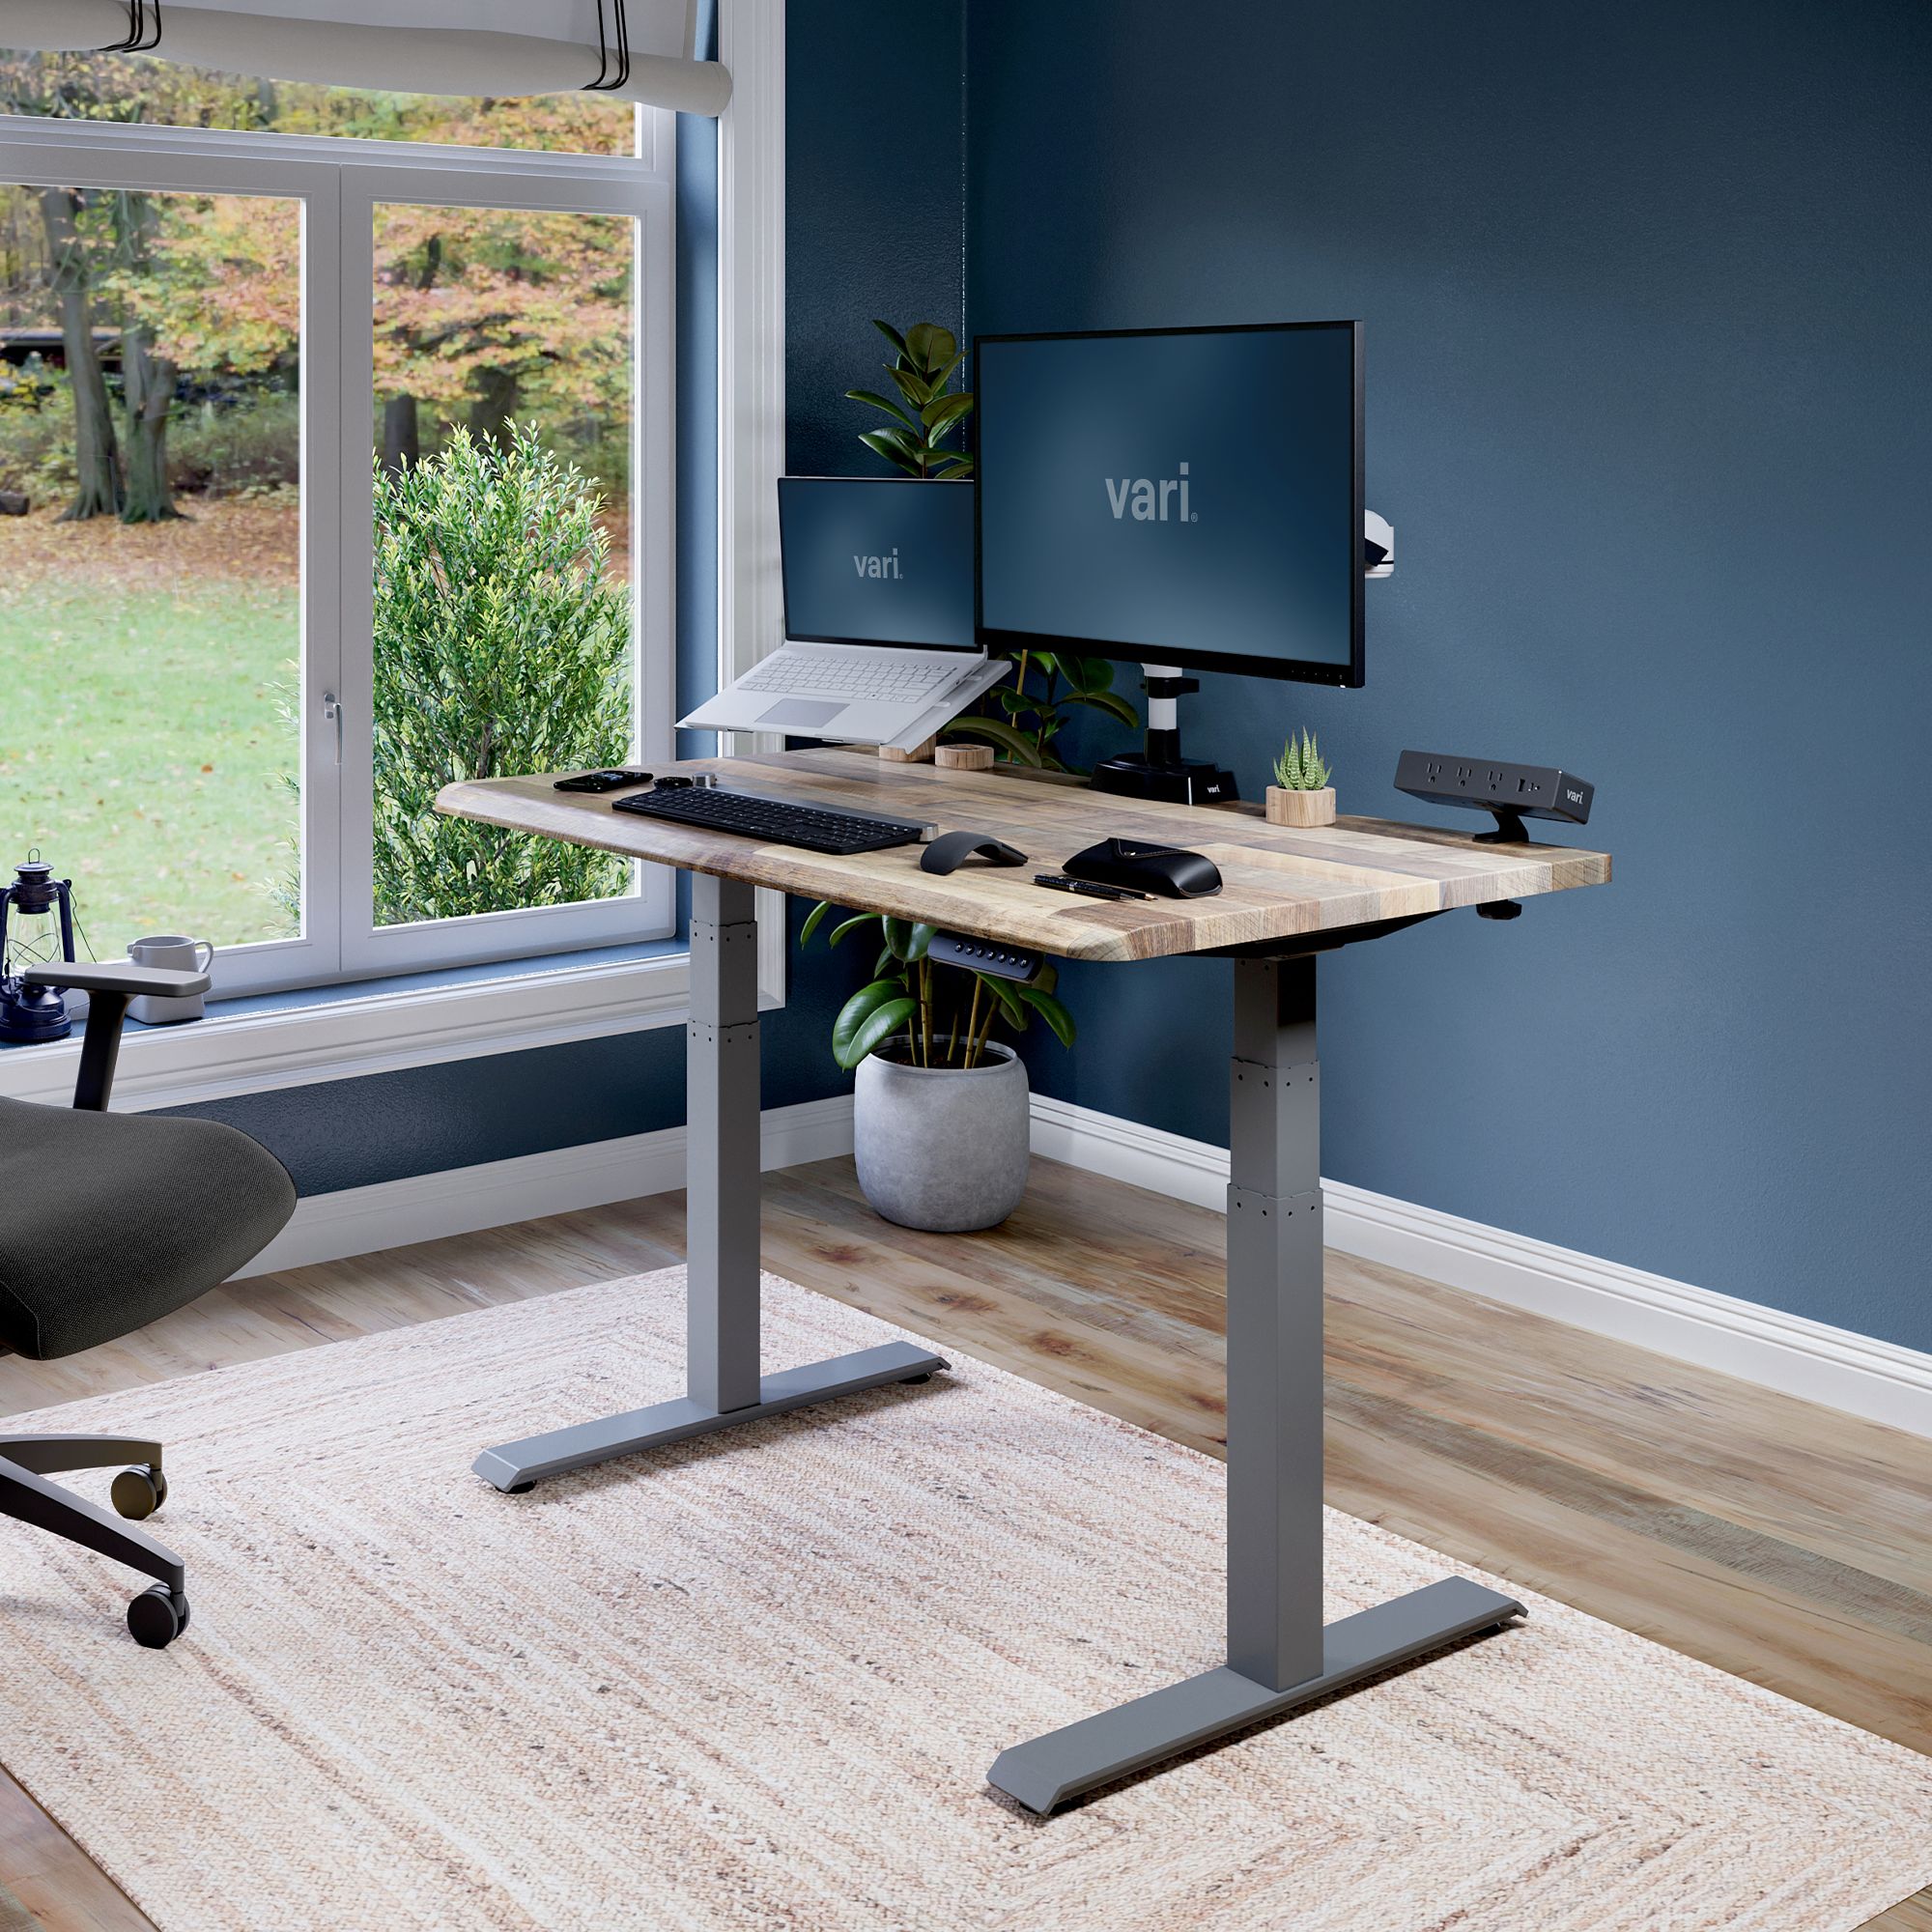 28 Power Rise Electric Adjustable Standing Desk Converter with